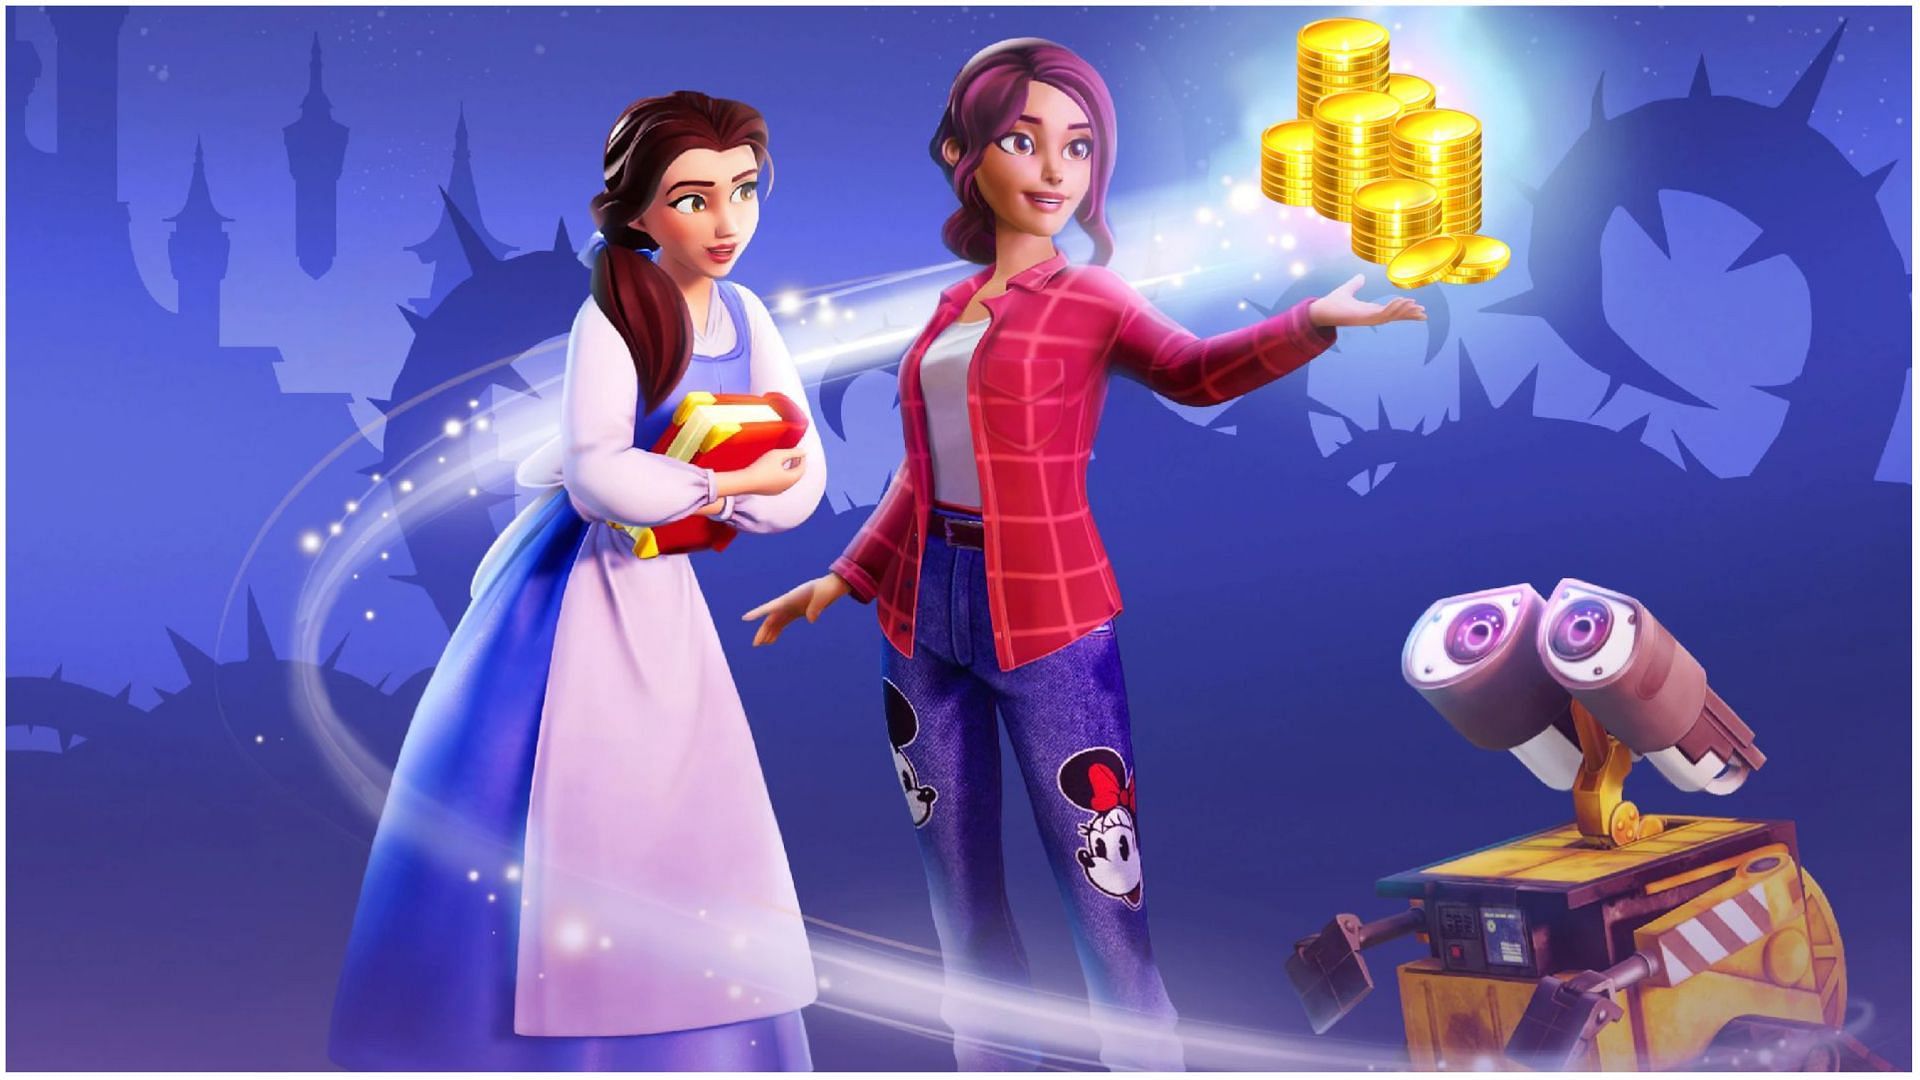 Star Coins are the main in-game currency in Disney Dreamlight Valley (Image via Gameloft)